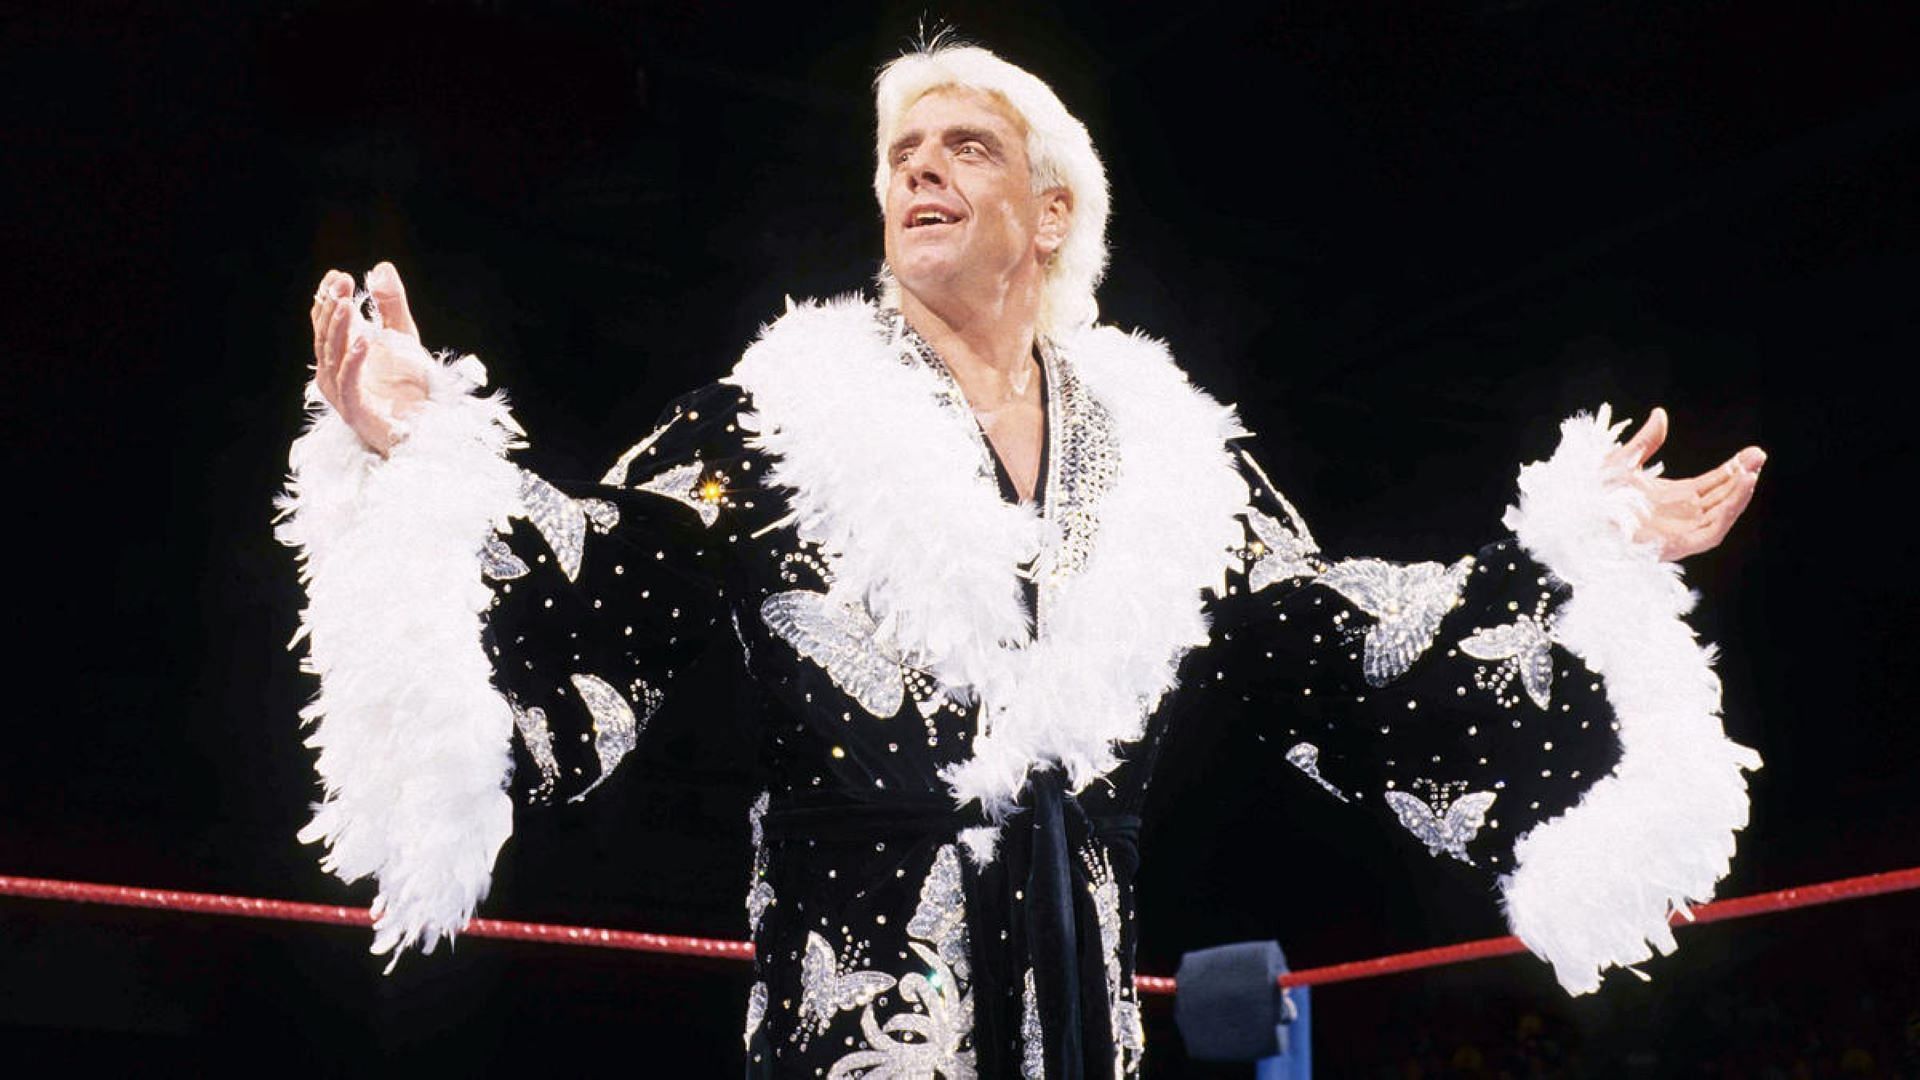 The Nature Boy is tied for the record of most World Championship reigns